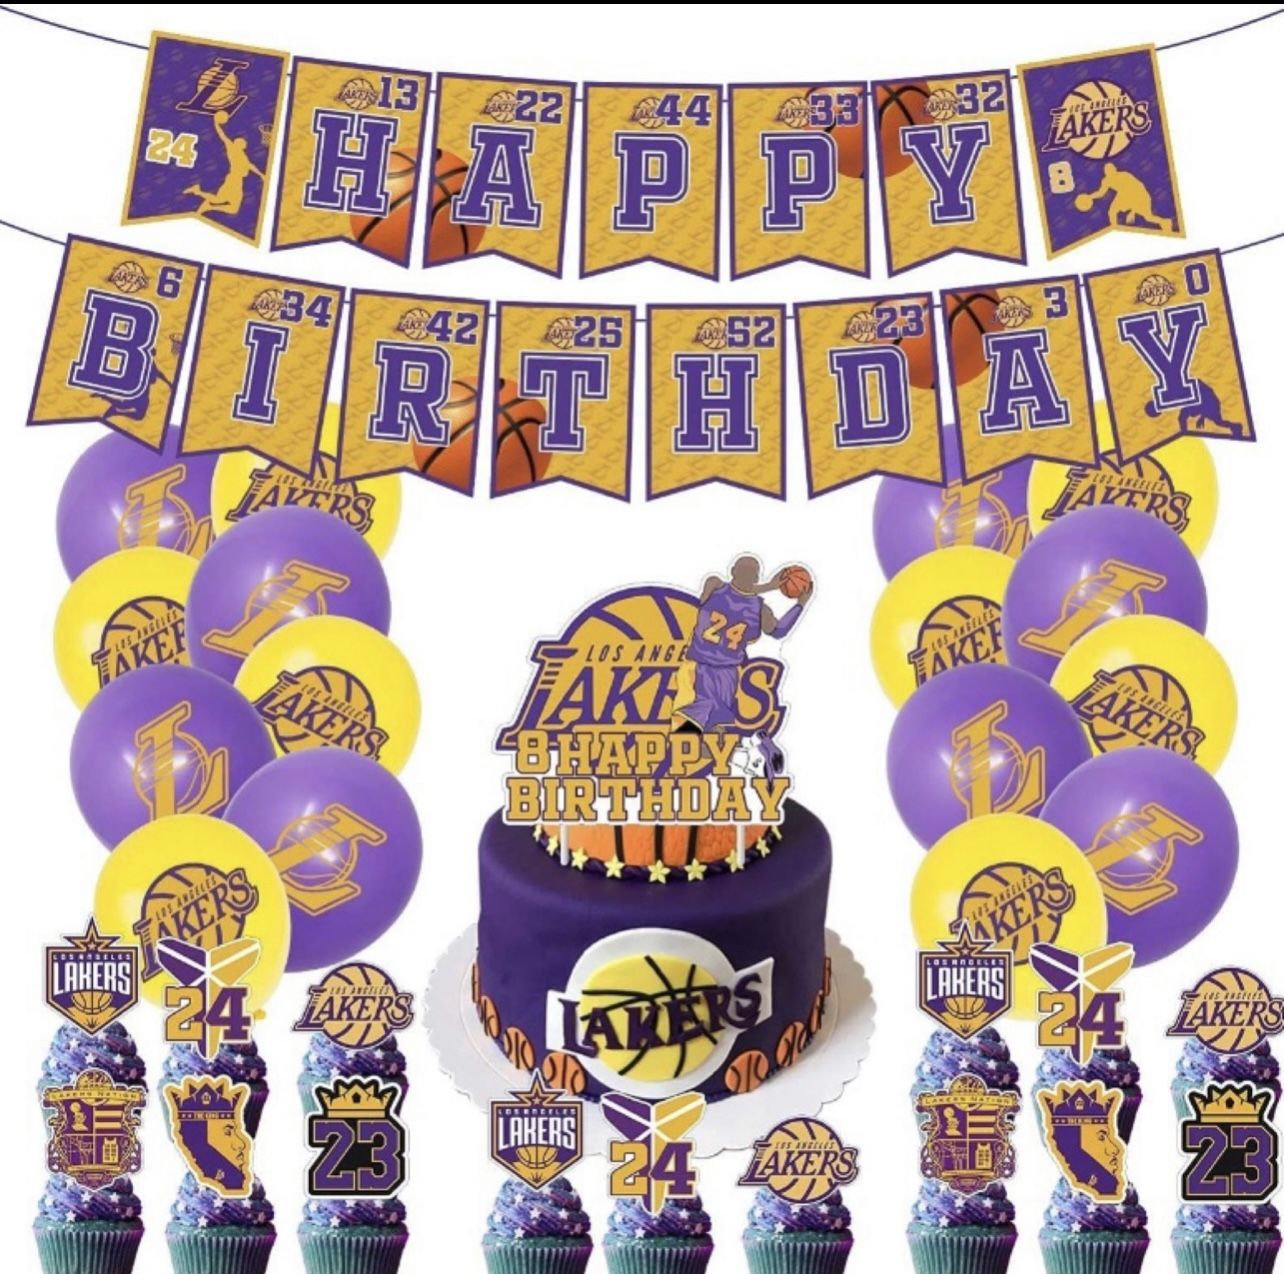 Lakerd Supplies Includes Cupcake Toppers Balloons Banner Cake Topper 23 Basketball Party for Men and Girls BoysLakers Kobe Birthday Party Decorations 